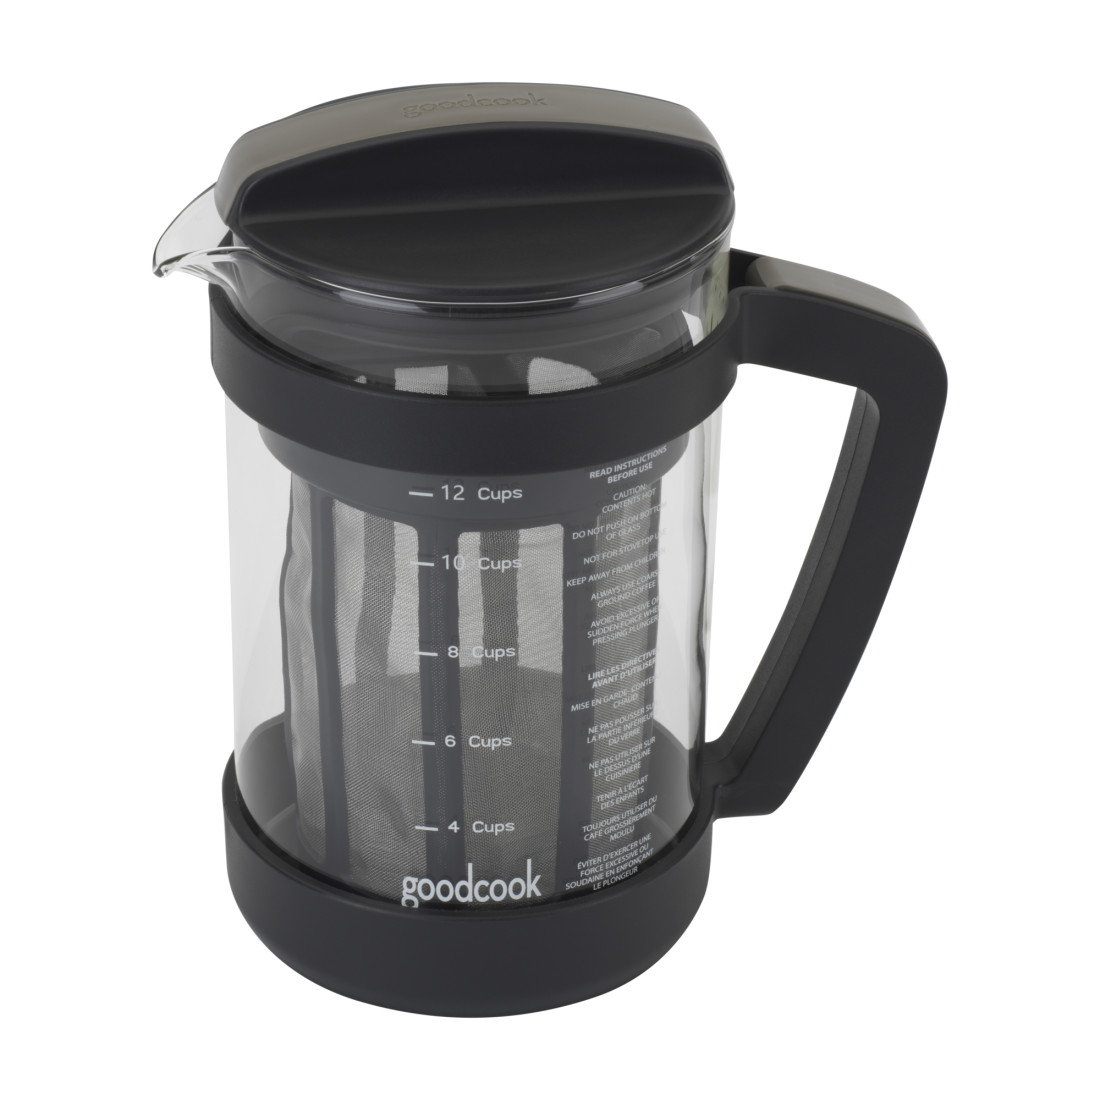 Black Cold Brew Coffee Maker - Iced Coffee Maker